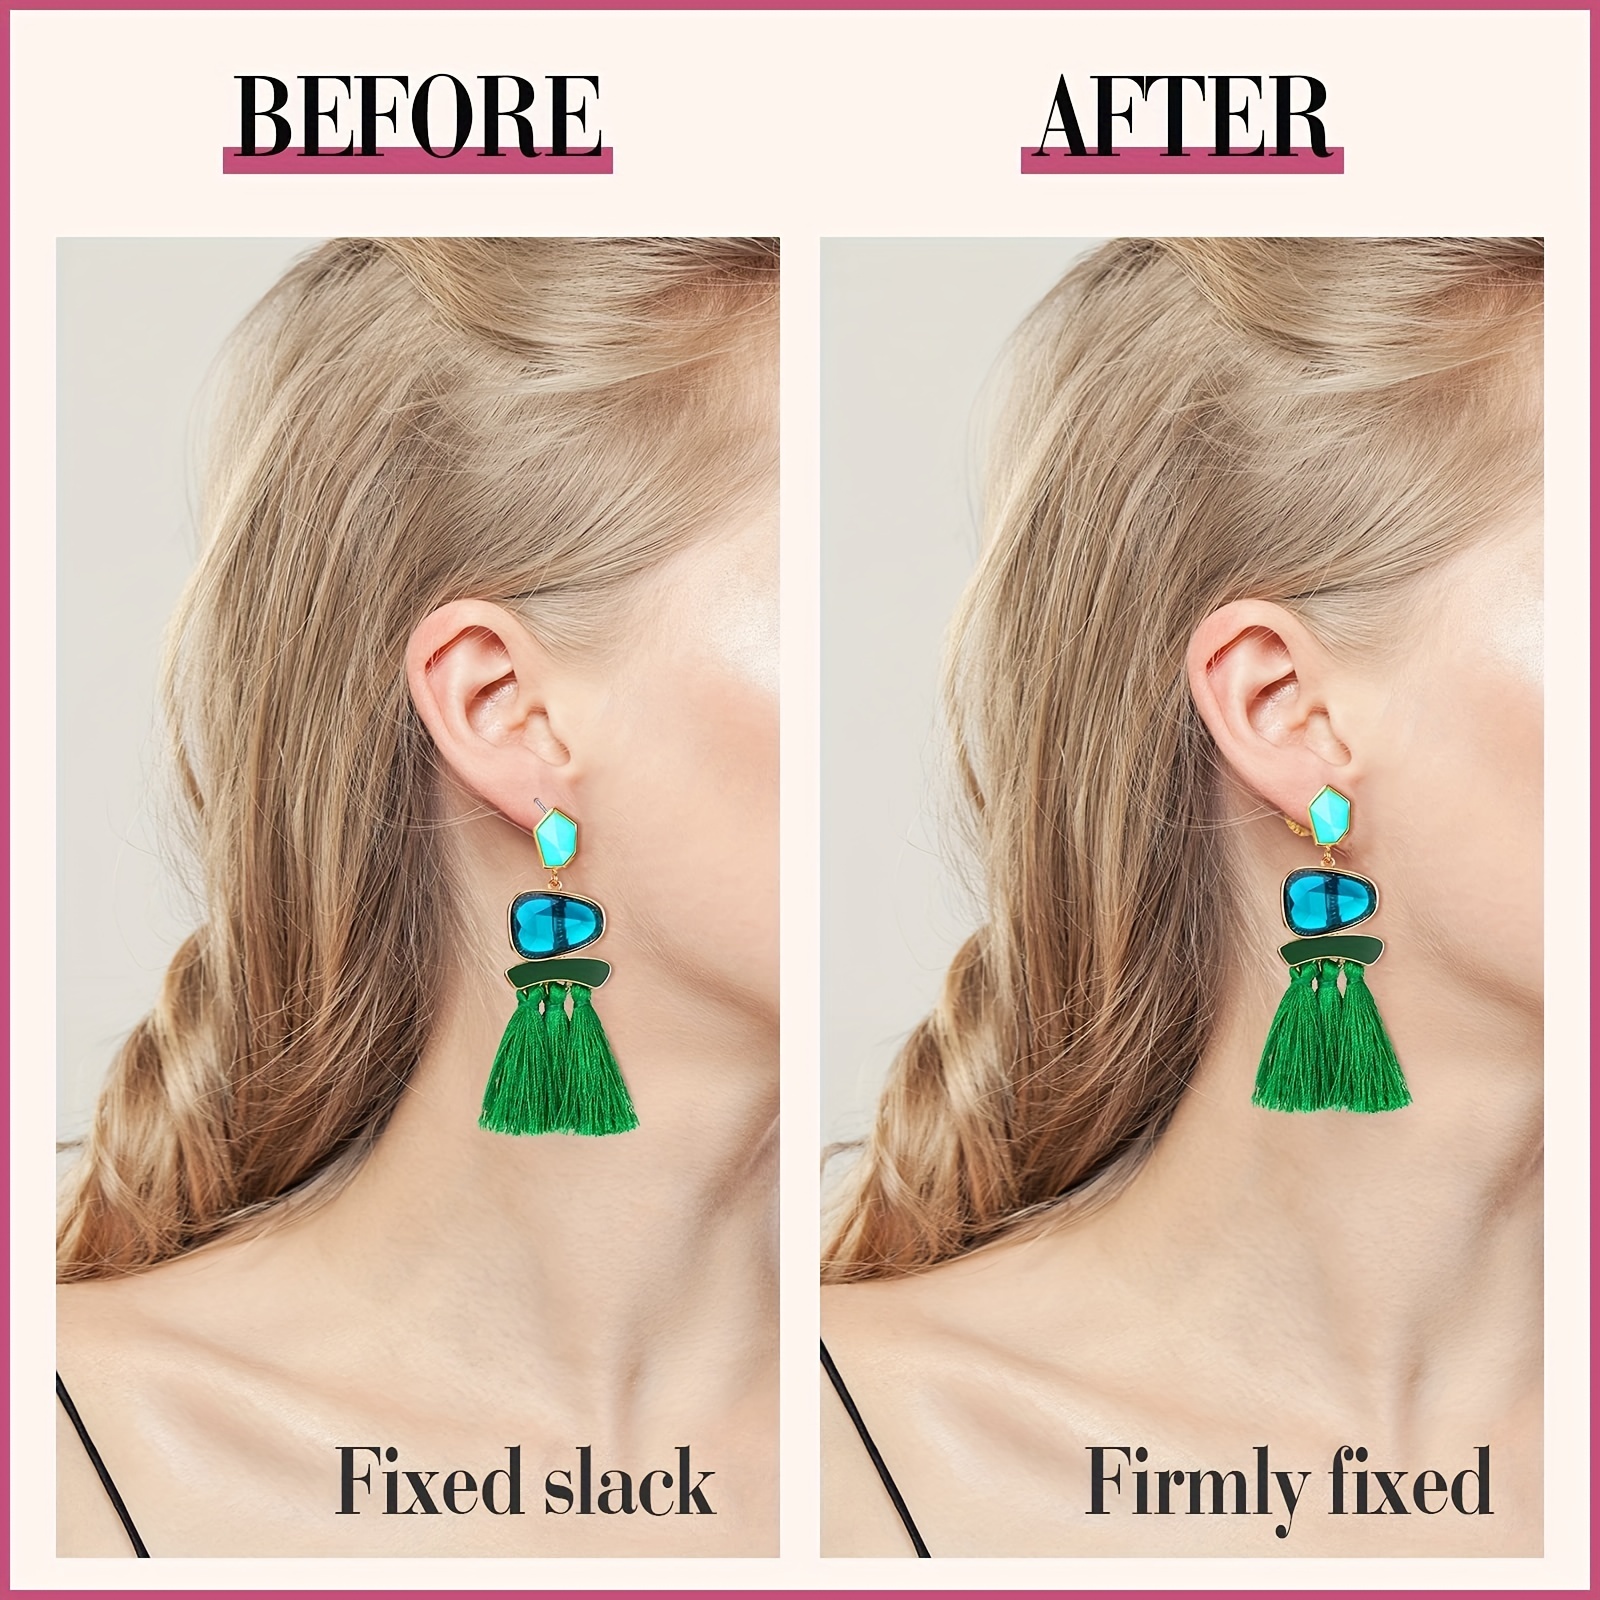 Earring Backs for Droopy Ears, Earring Lifters for Stretched